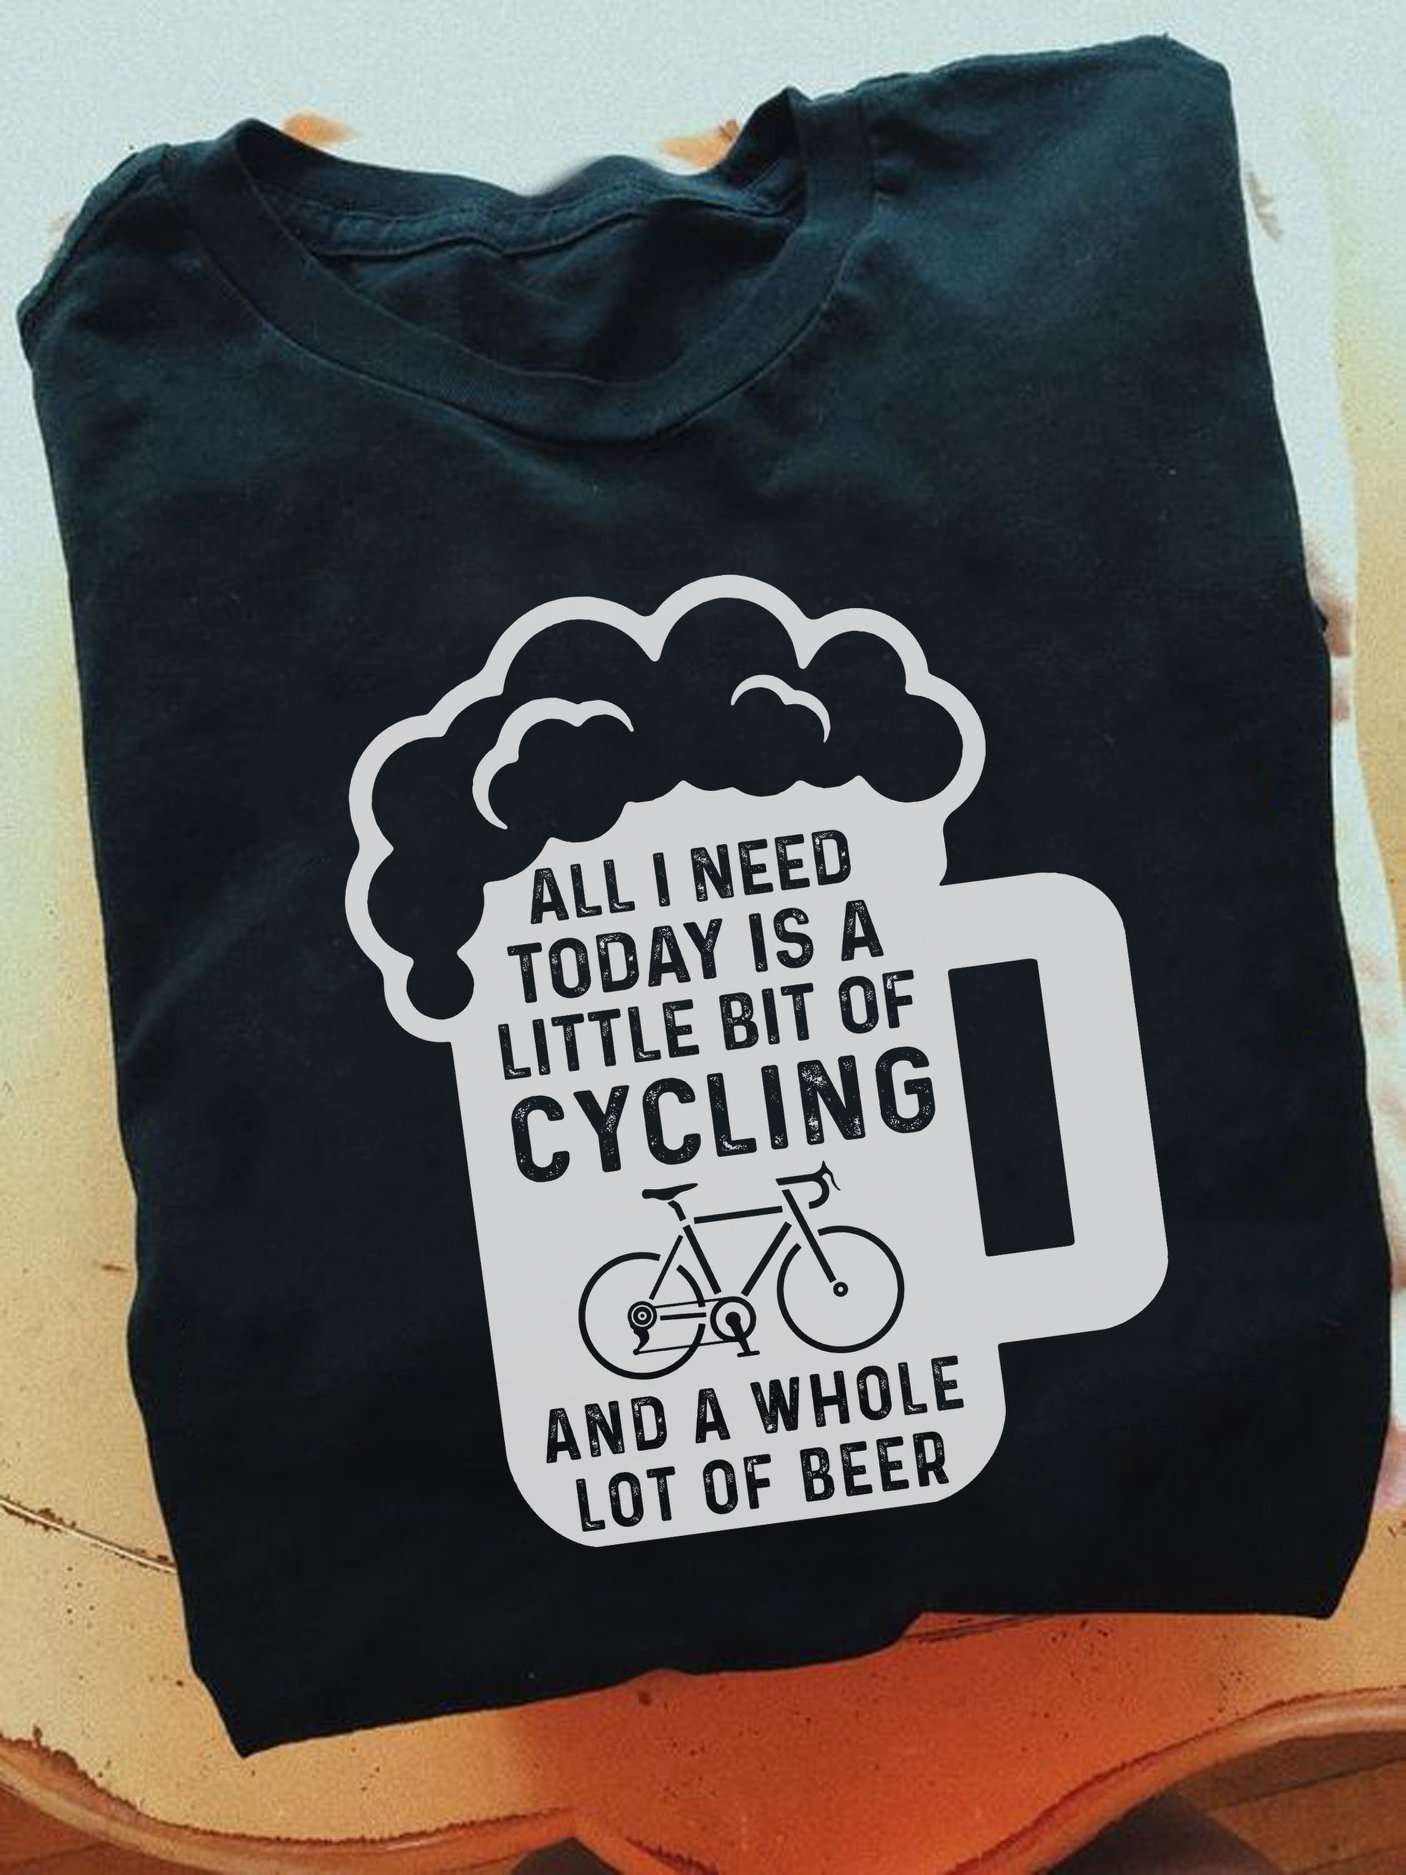 Beer Cycling - All i need today is a little bit of cycling and a whole lot of beer